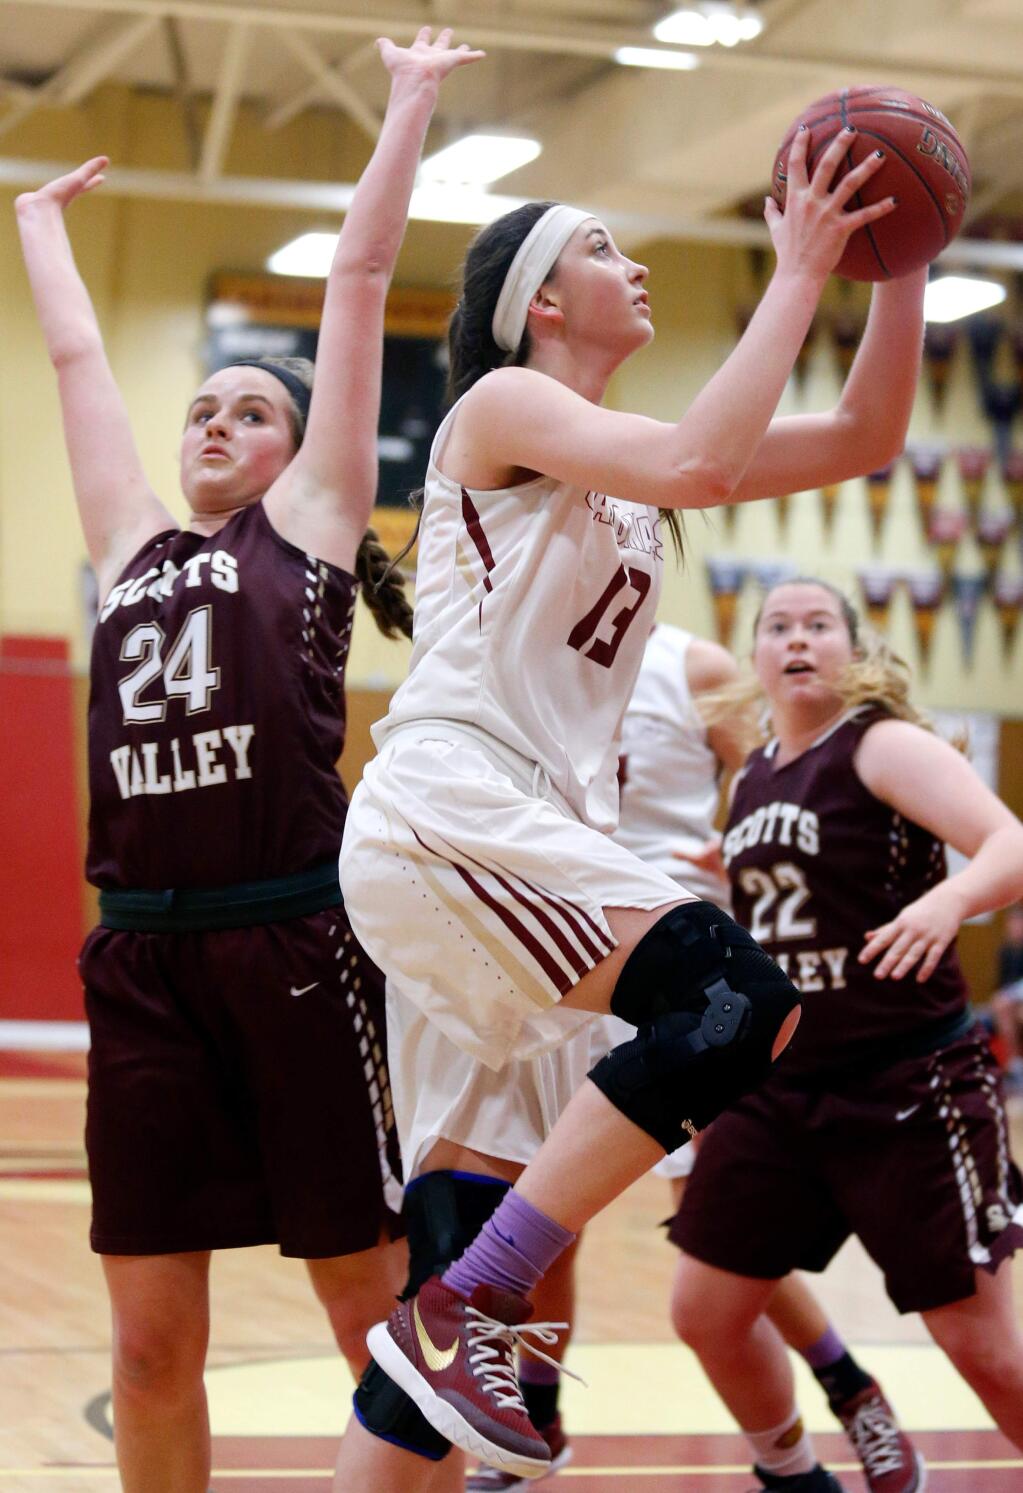 Cardinal Newman's Hailey Vice-Neat (13) gets around Scotts Valley's Sam Boyle (24) for a layup during the second half of the CIF NorCal girls basketball playoff game between Scotts Valley and Cardinal Newman high schools in Santa Rosa, California on Saturday, March 12, 2016. (Alvin Jornada / The Press Democrat)